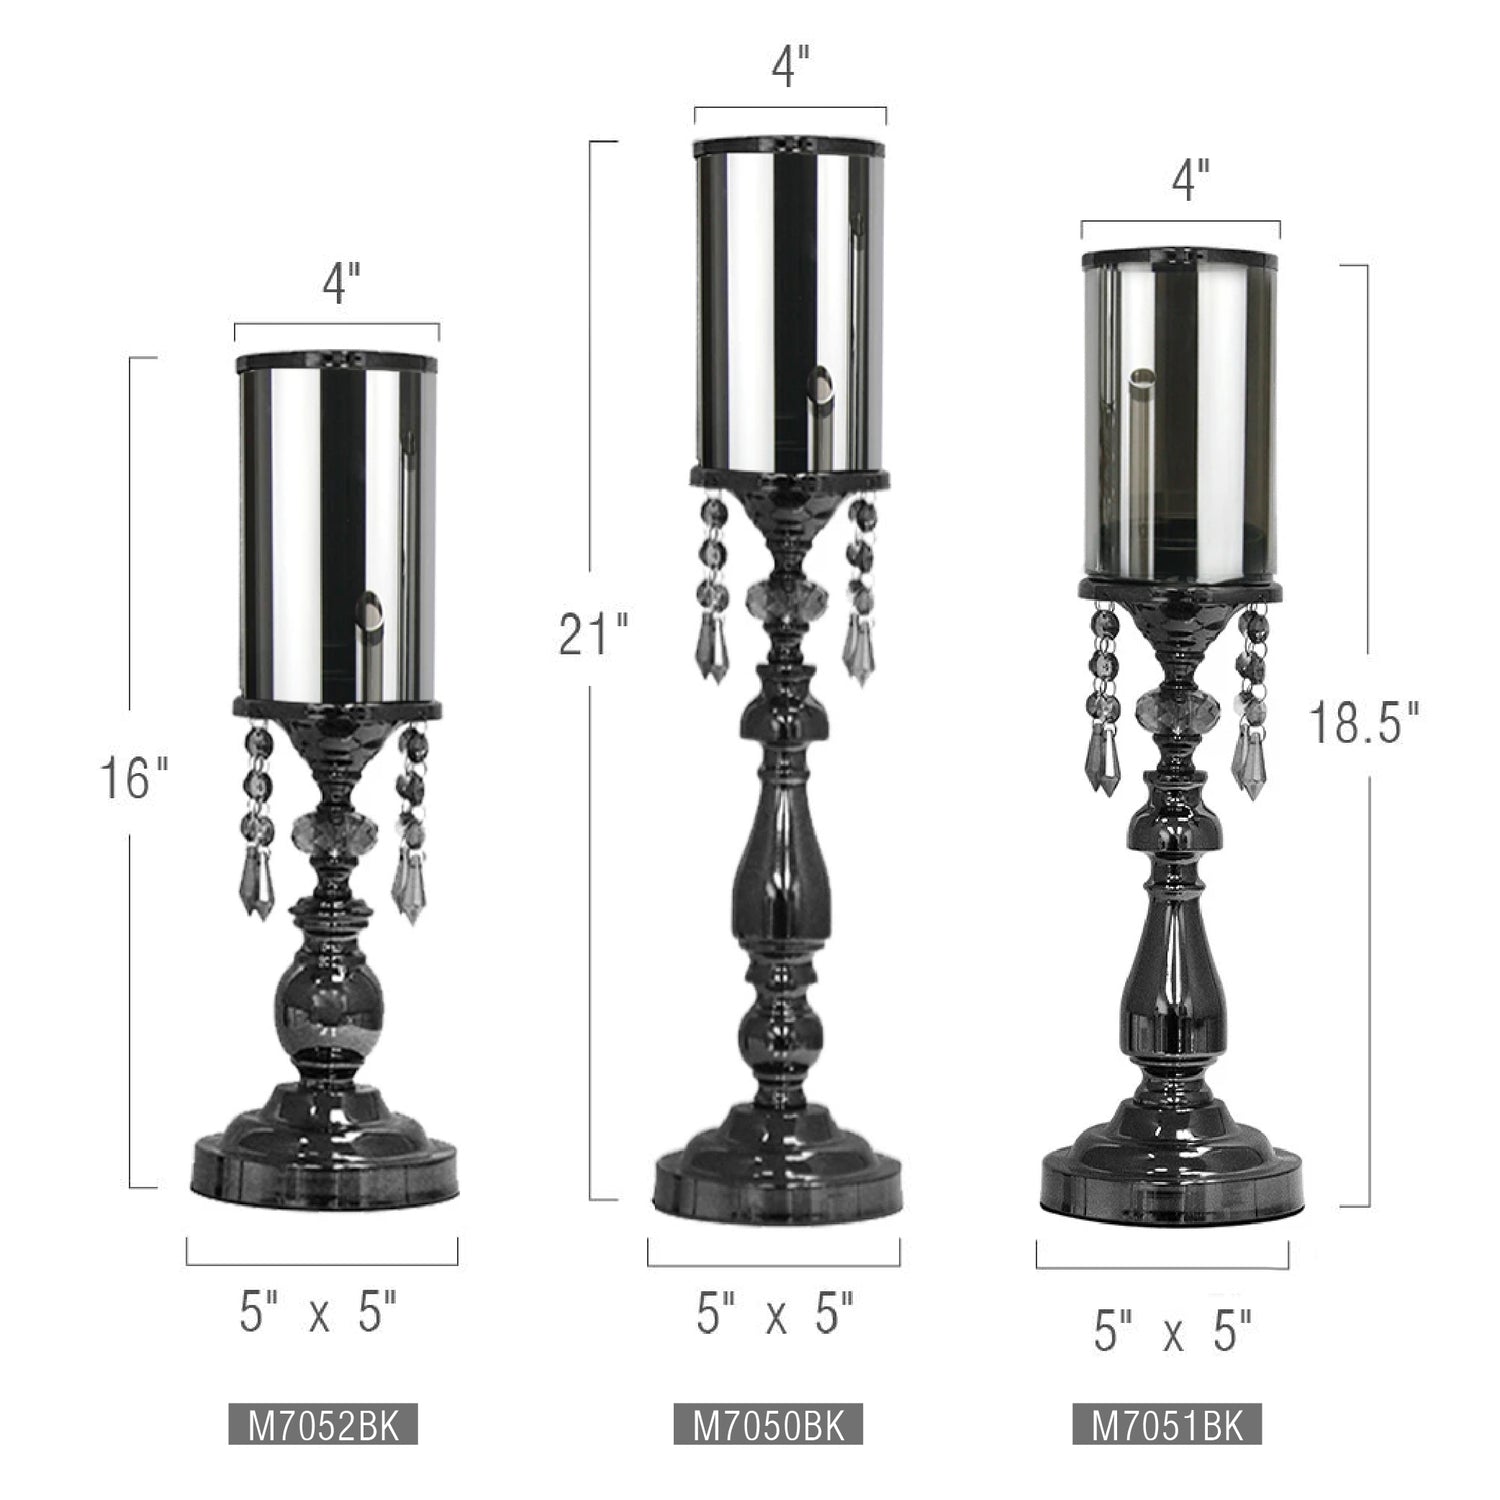 Black Crystal Candle Stand | Galore Home: Luxury Home Decor, Elegant Home Furnishings, Stylish Home Accents & Contemporary Home Accessories